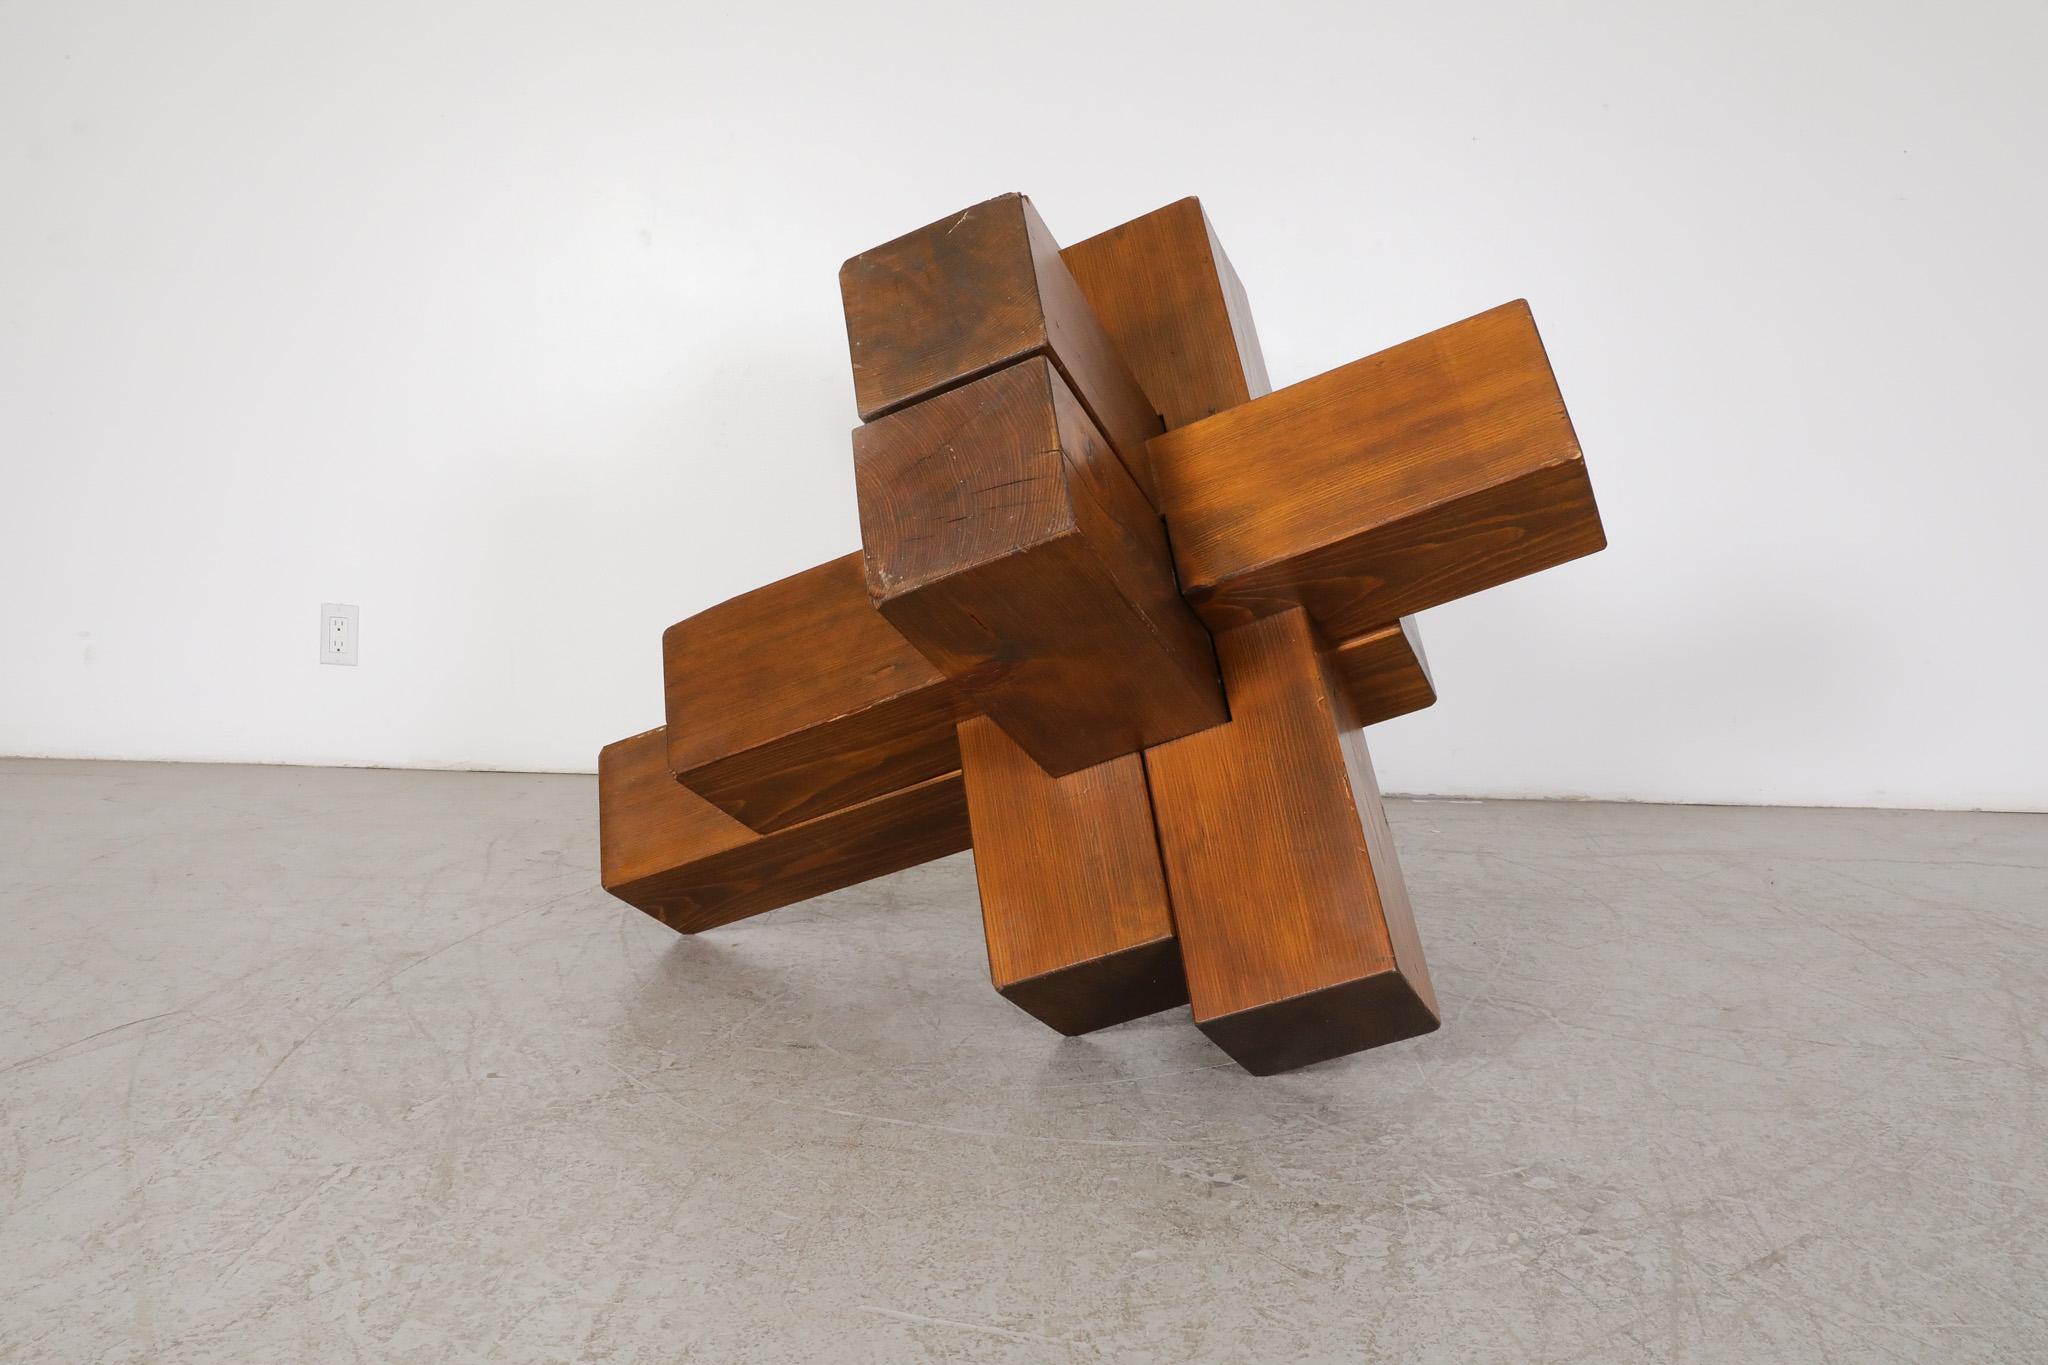 Large Walnut Abstract Cubist Sculpture, France, 1960's For Sale 1